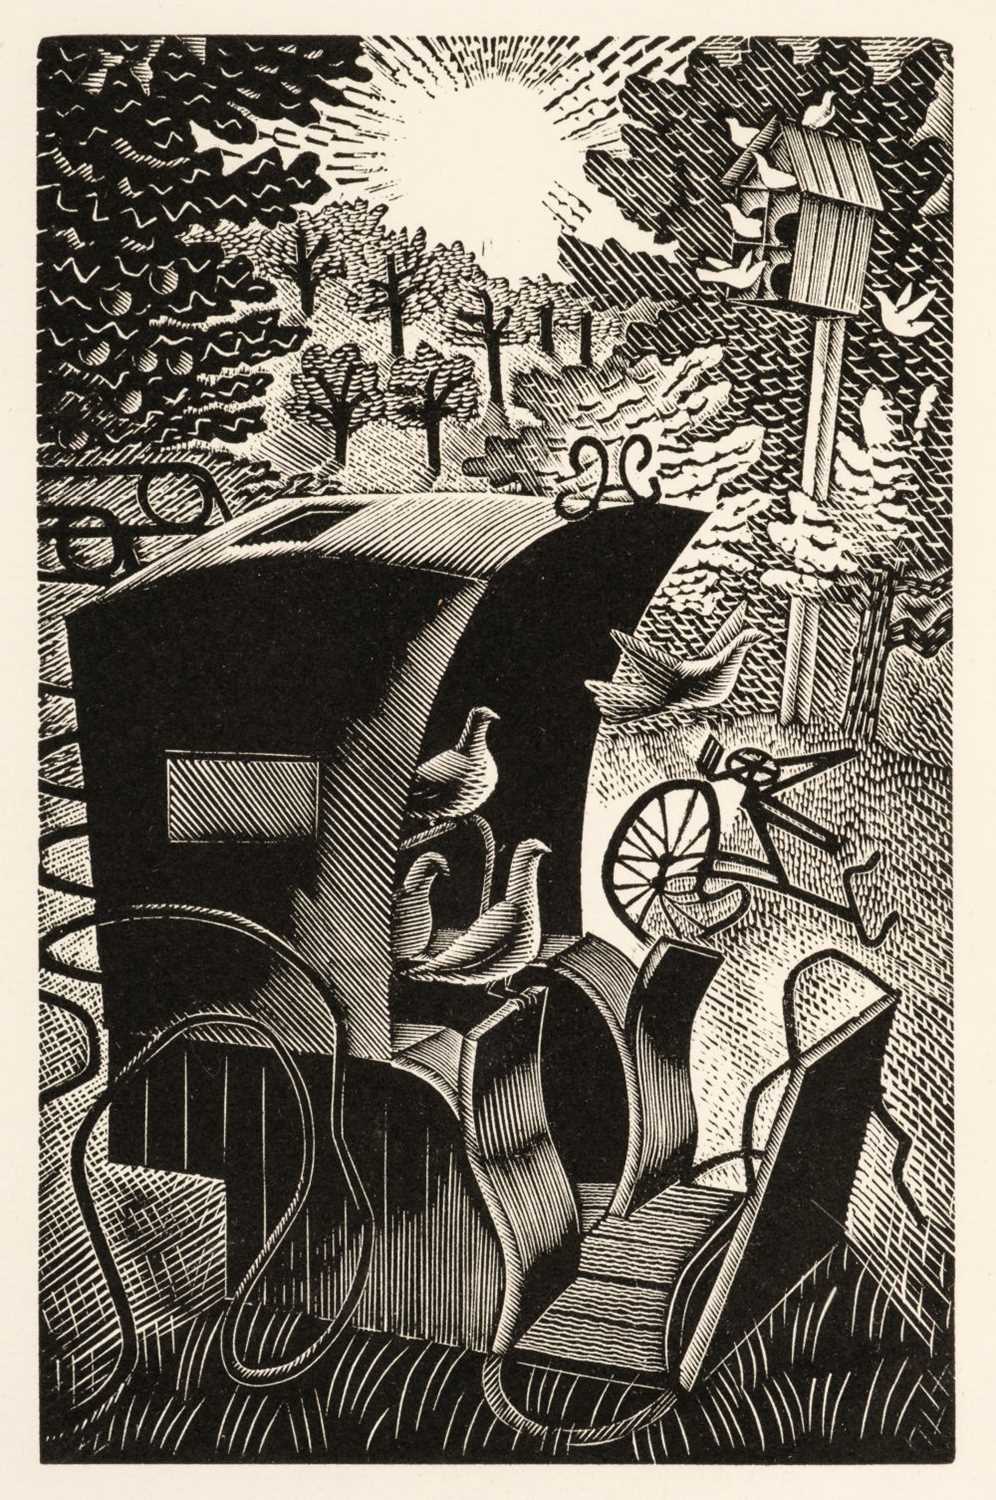 Lot 627 - Golden Cockerel Press. The Hansom Cab and the Pigeons, 1935